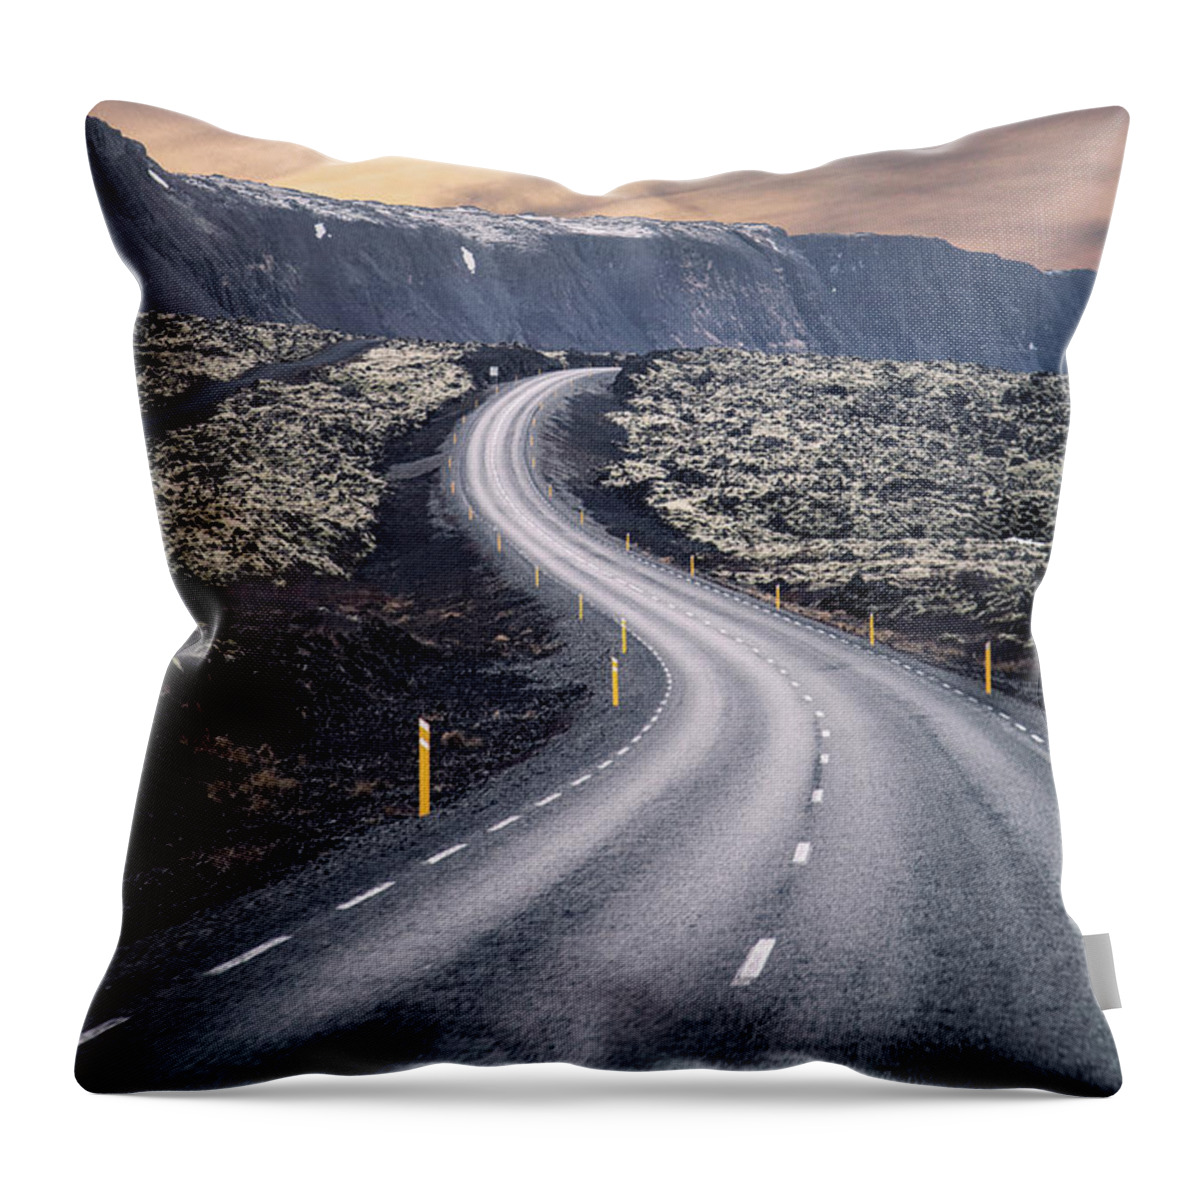 Kremsdorf Throw Pillow featuring the photograph What Lies Ahead by Evelina Kremsdorf